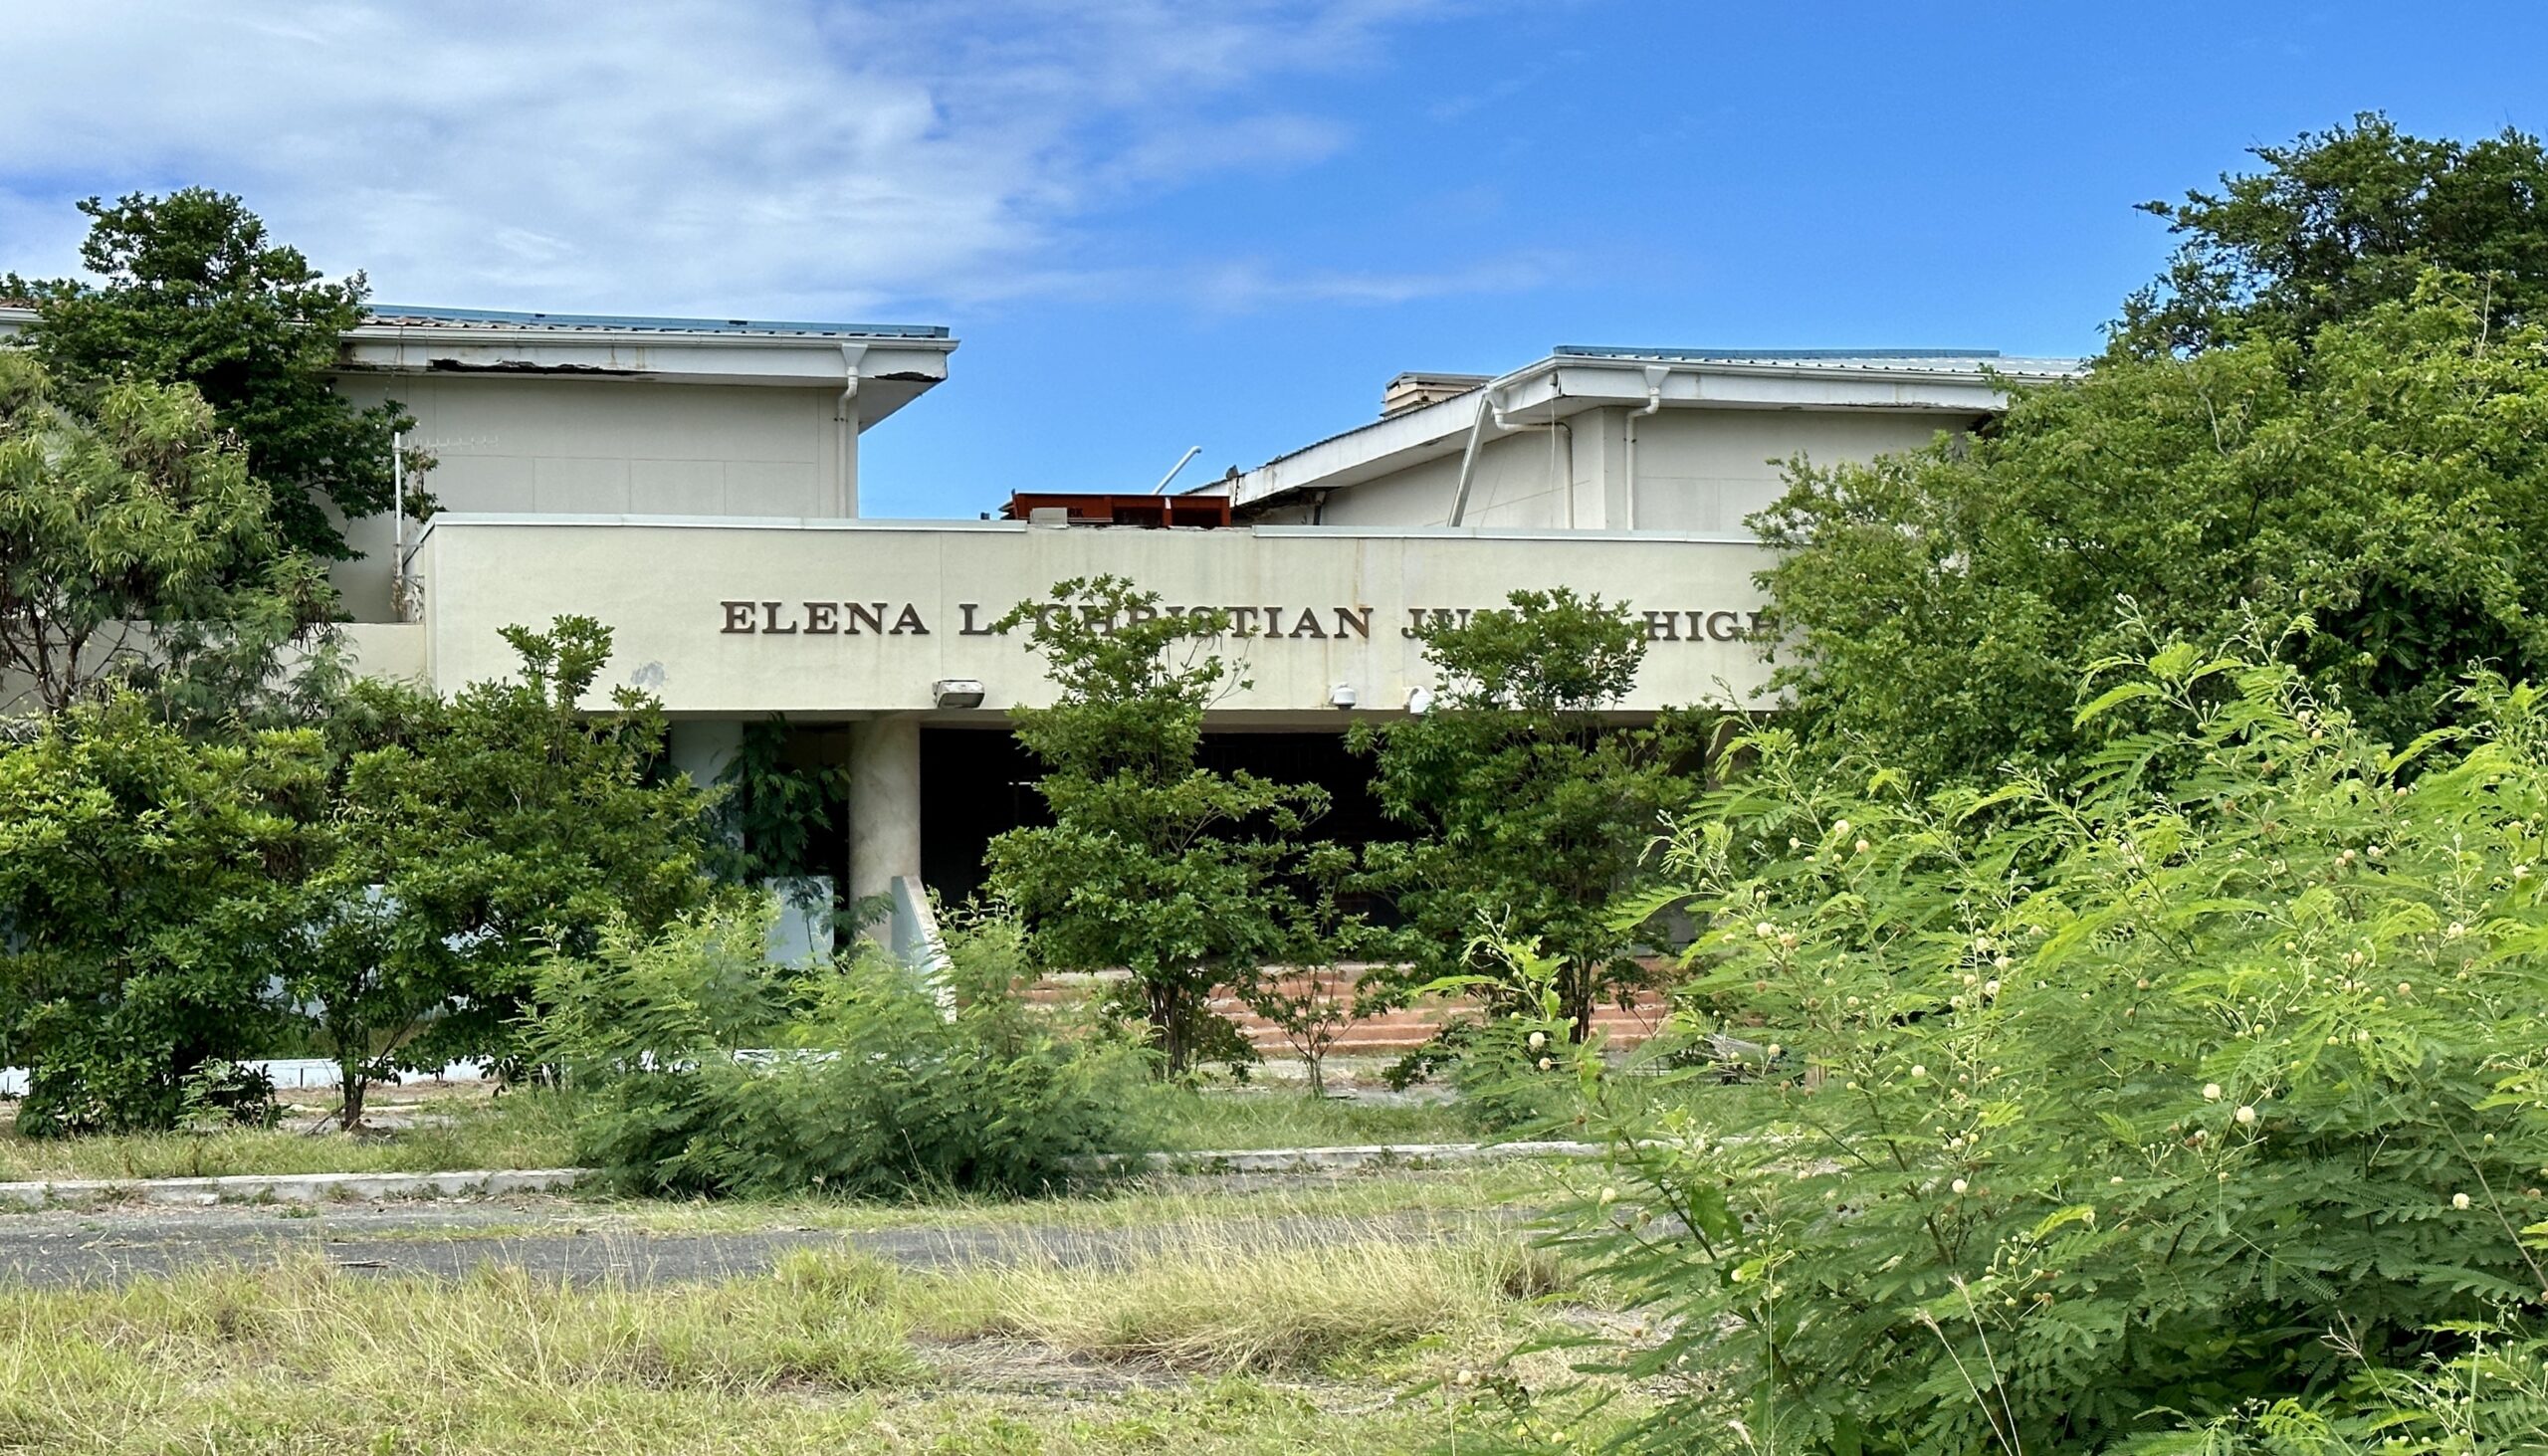 Elena L. Christian Junior High School on St. Croix was closed in 2014 due to longstanding environmental and structural issues and never reopened. It is in a primarily residential neighborhood. The photo reflects the condition on Aug. 4. (Source Photo by Linda Morland)